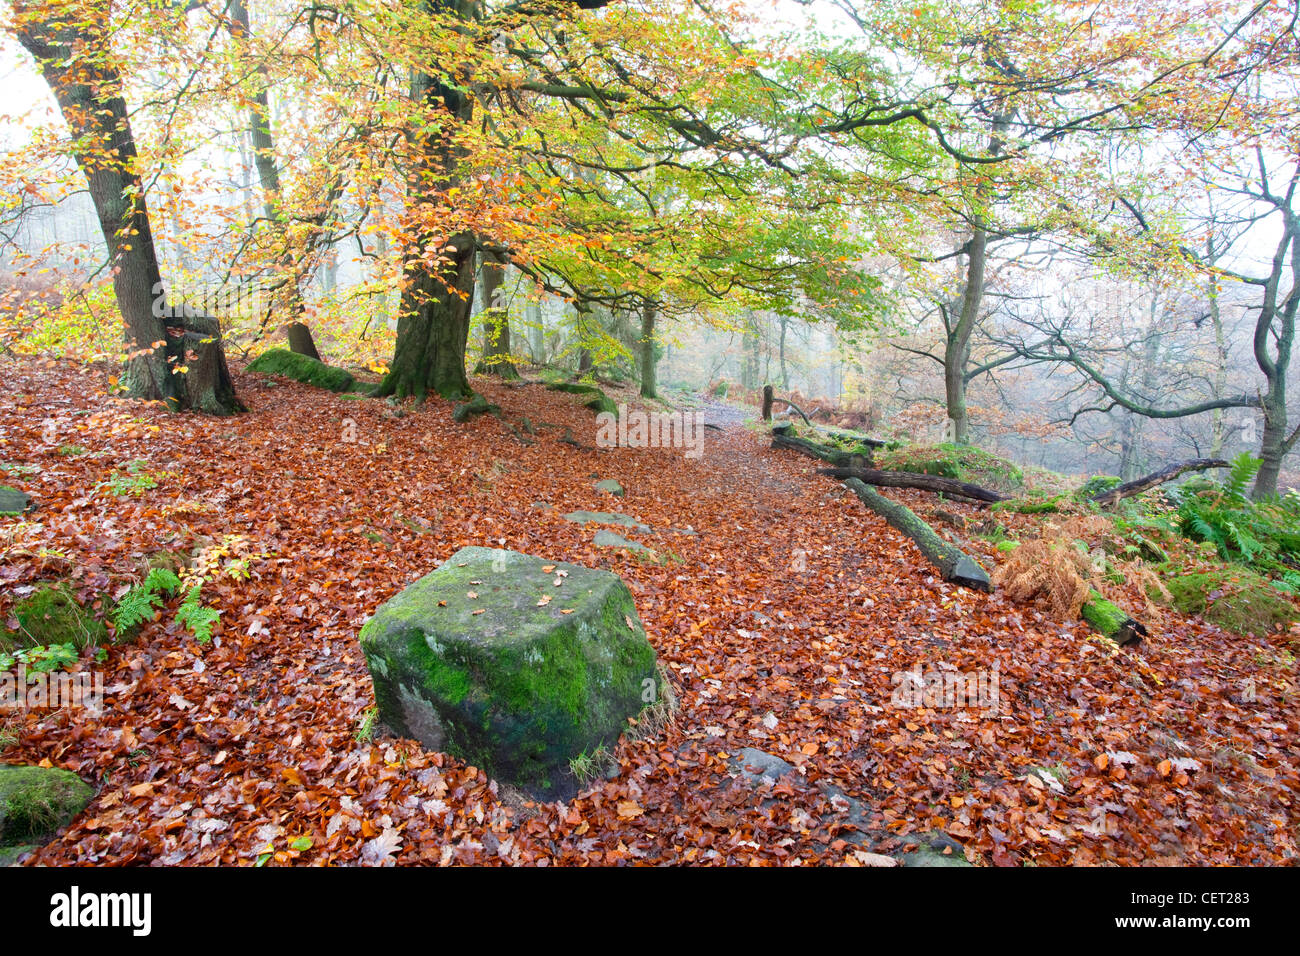 Padley Gorge in the Autumn, one of the finest remaining examples of oak and birch woodland that once covered many Dark Peak vall Stock Photo